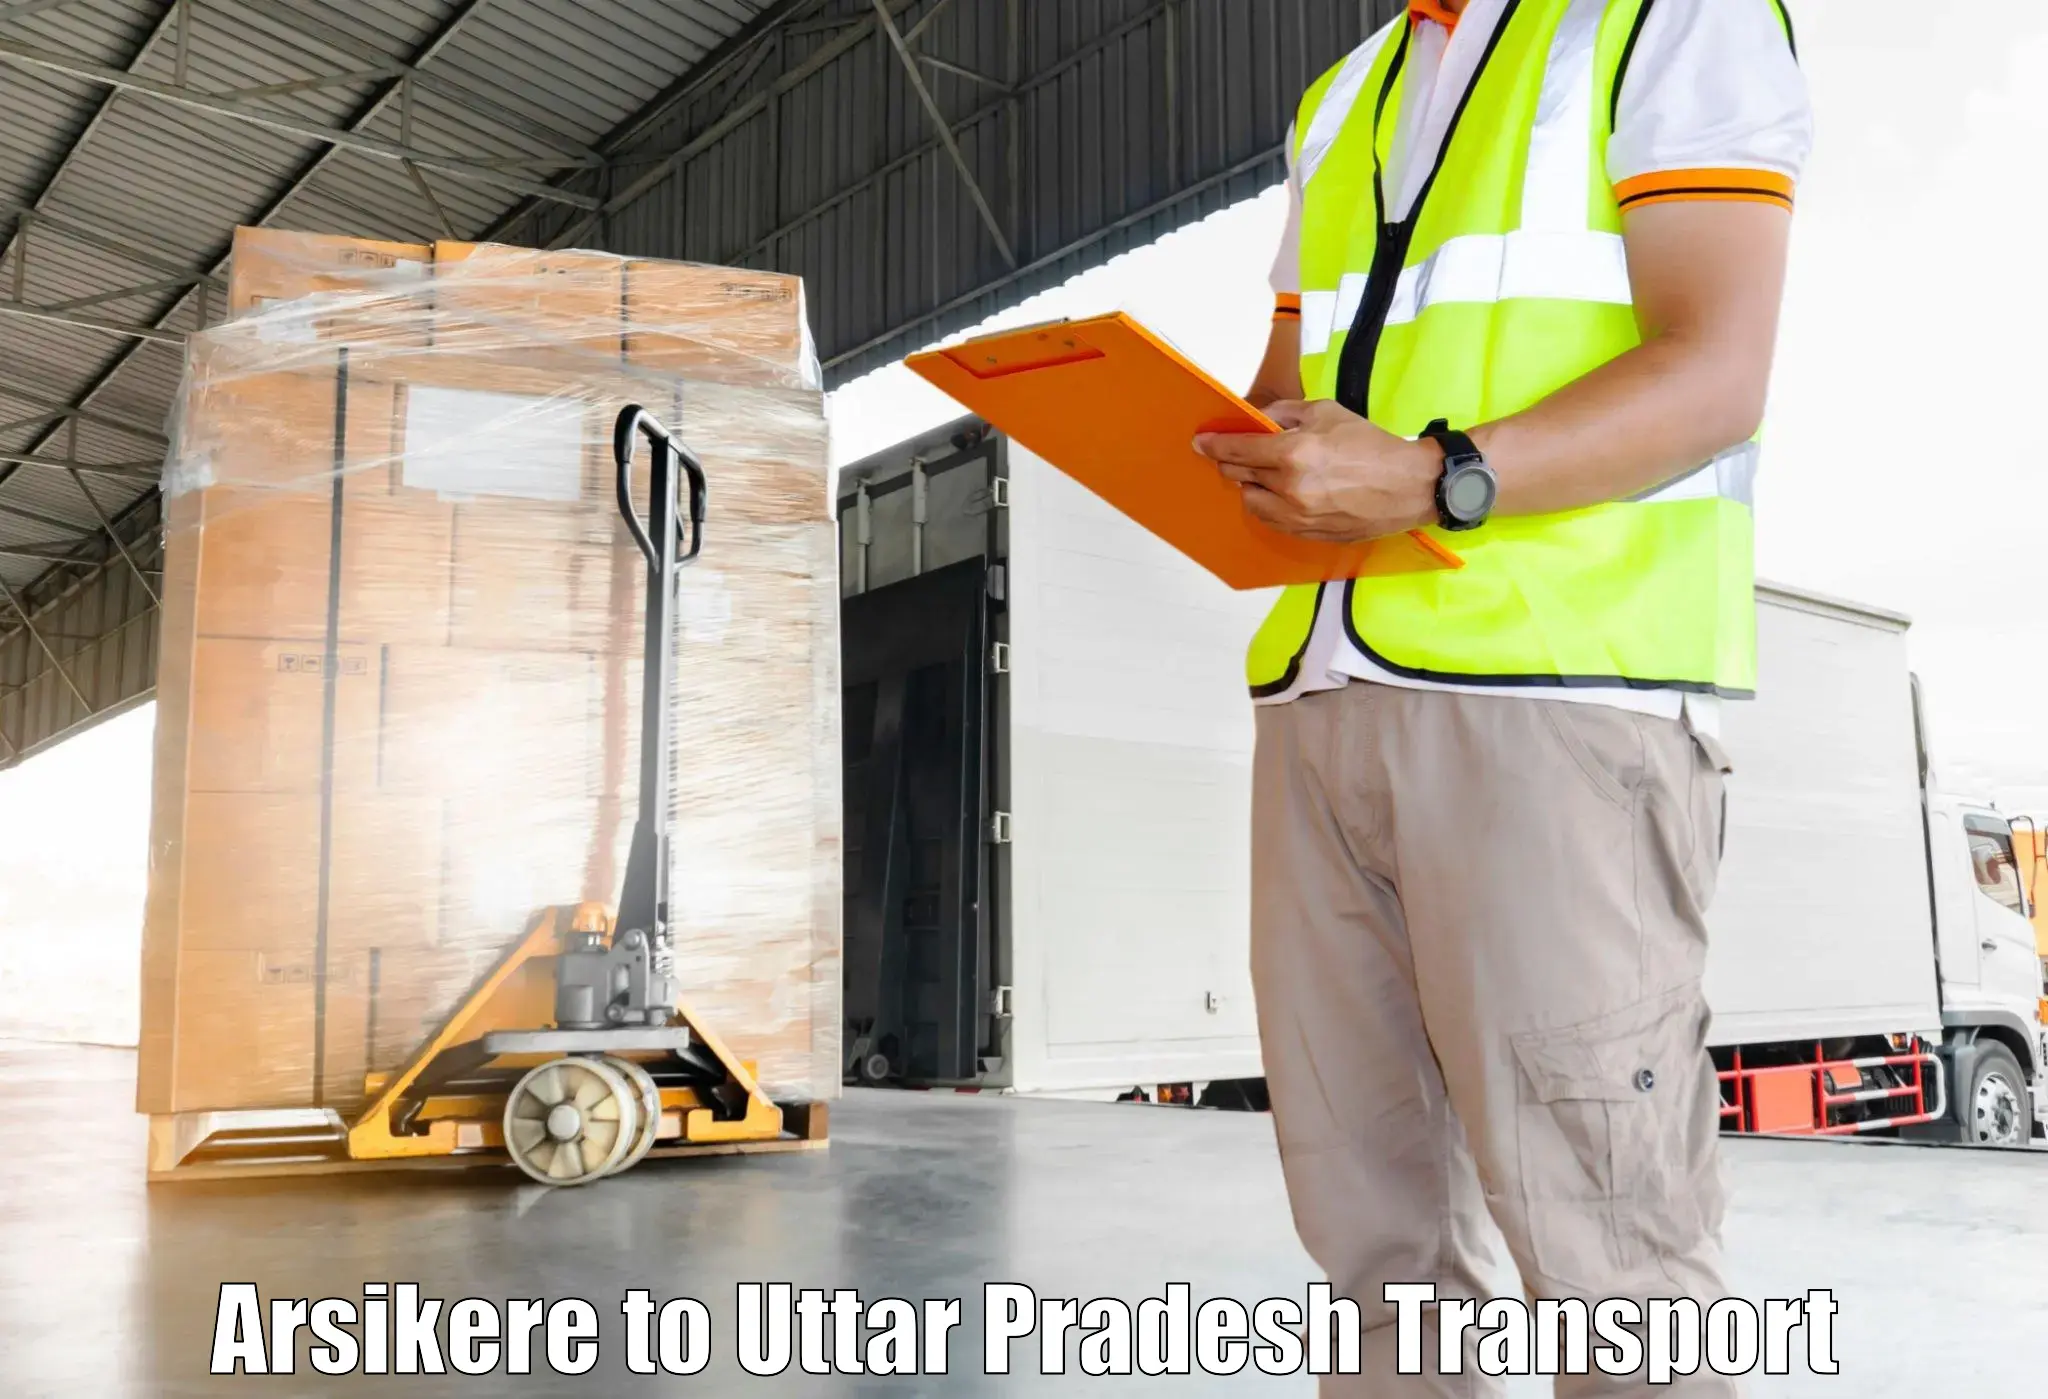 Shipping services Arsikere to Sultanpur Avadh